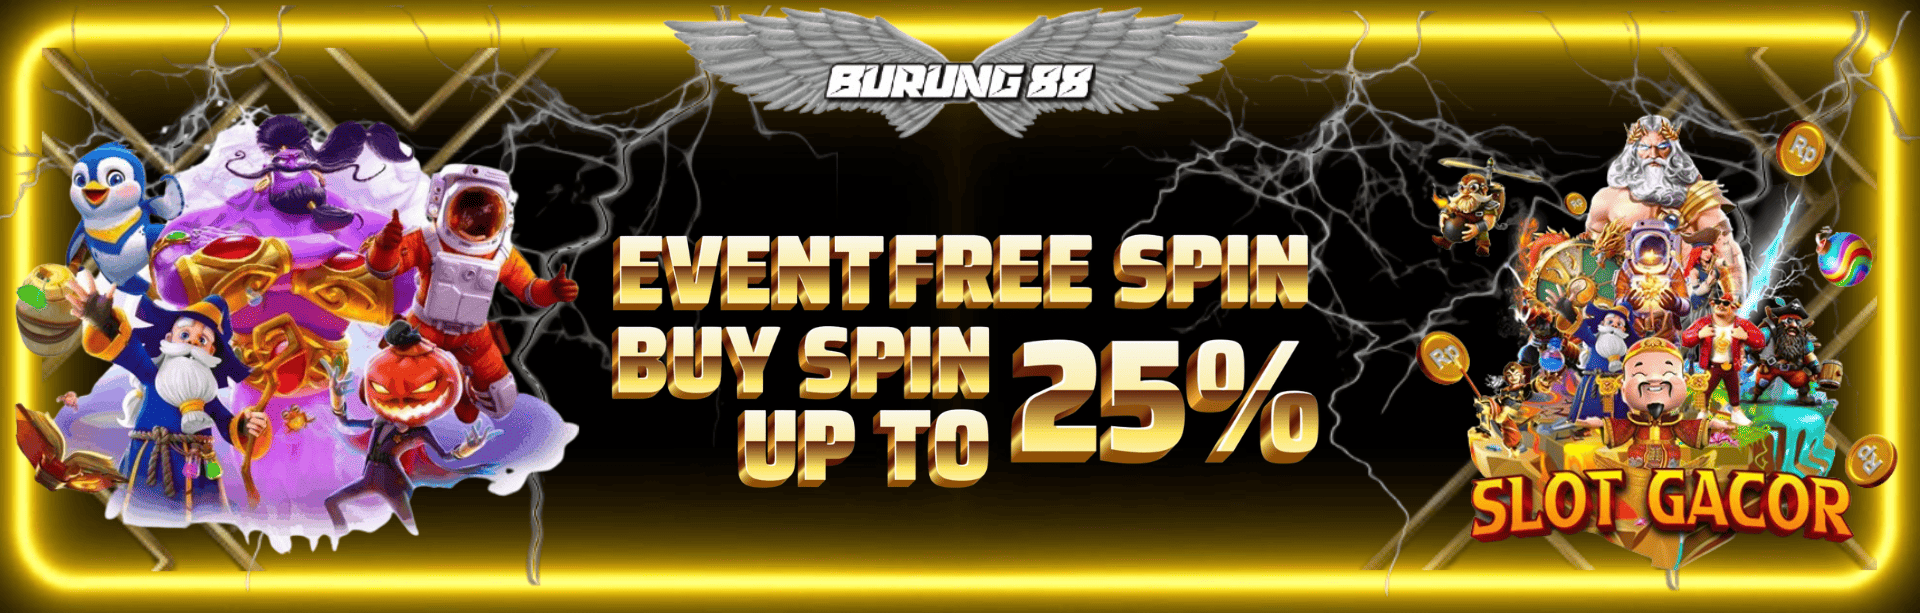 EVENT FREESPIN & BUYSPIN 25%